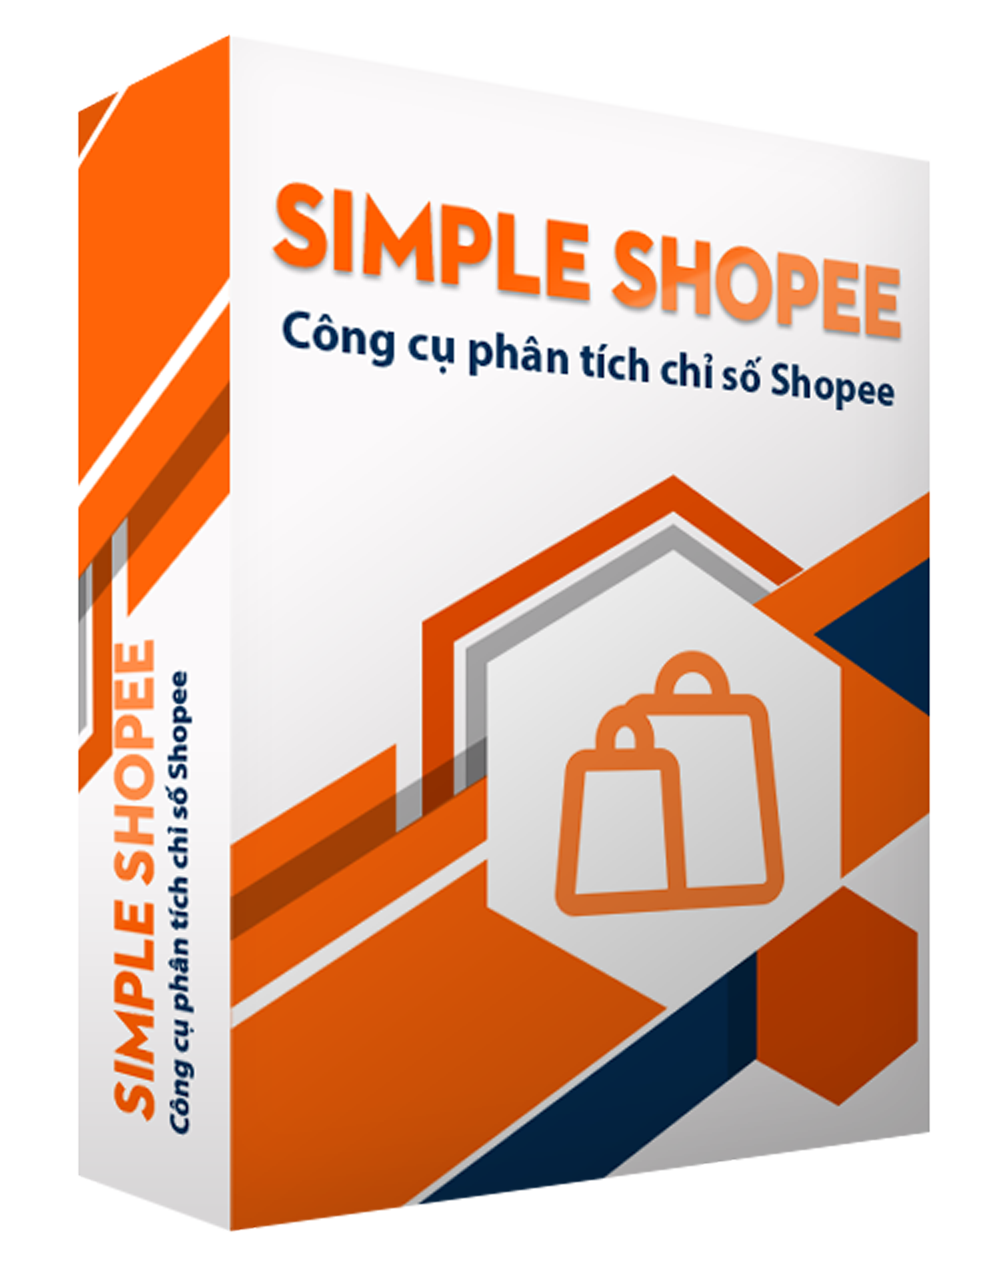 2. Bảng giá Simple Research